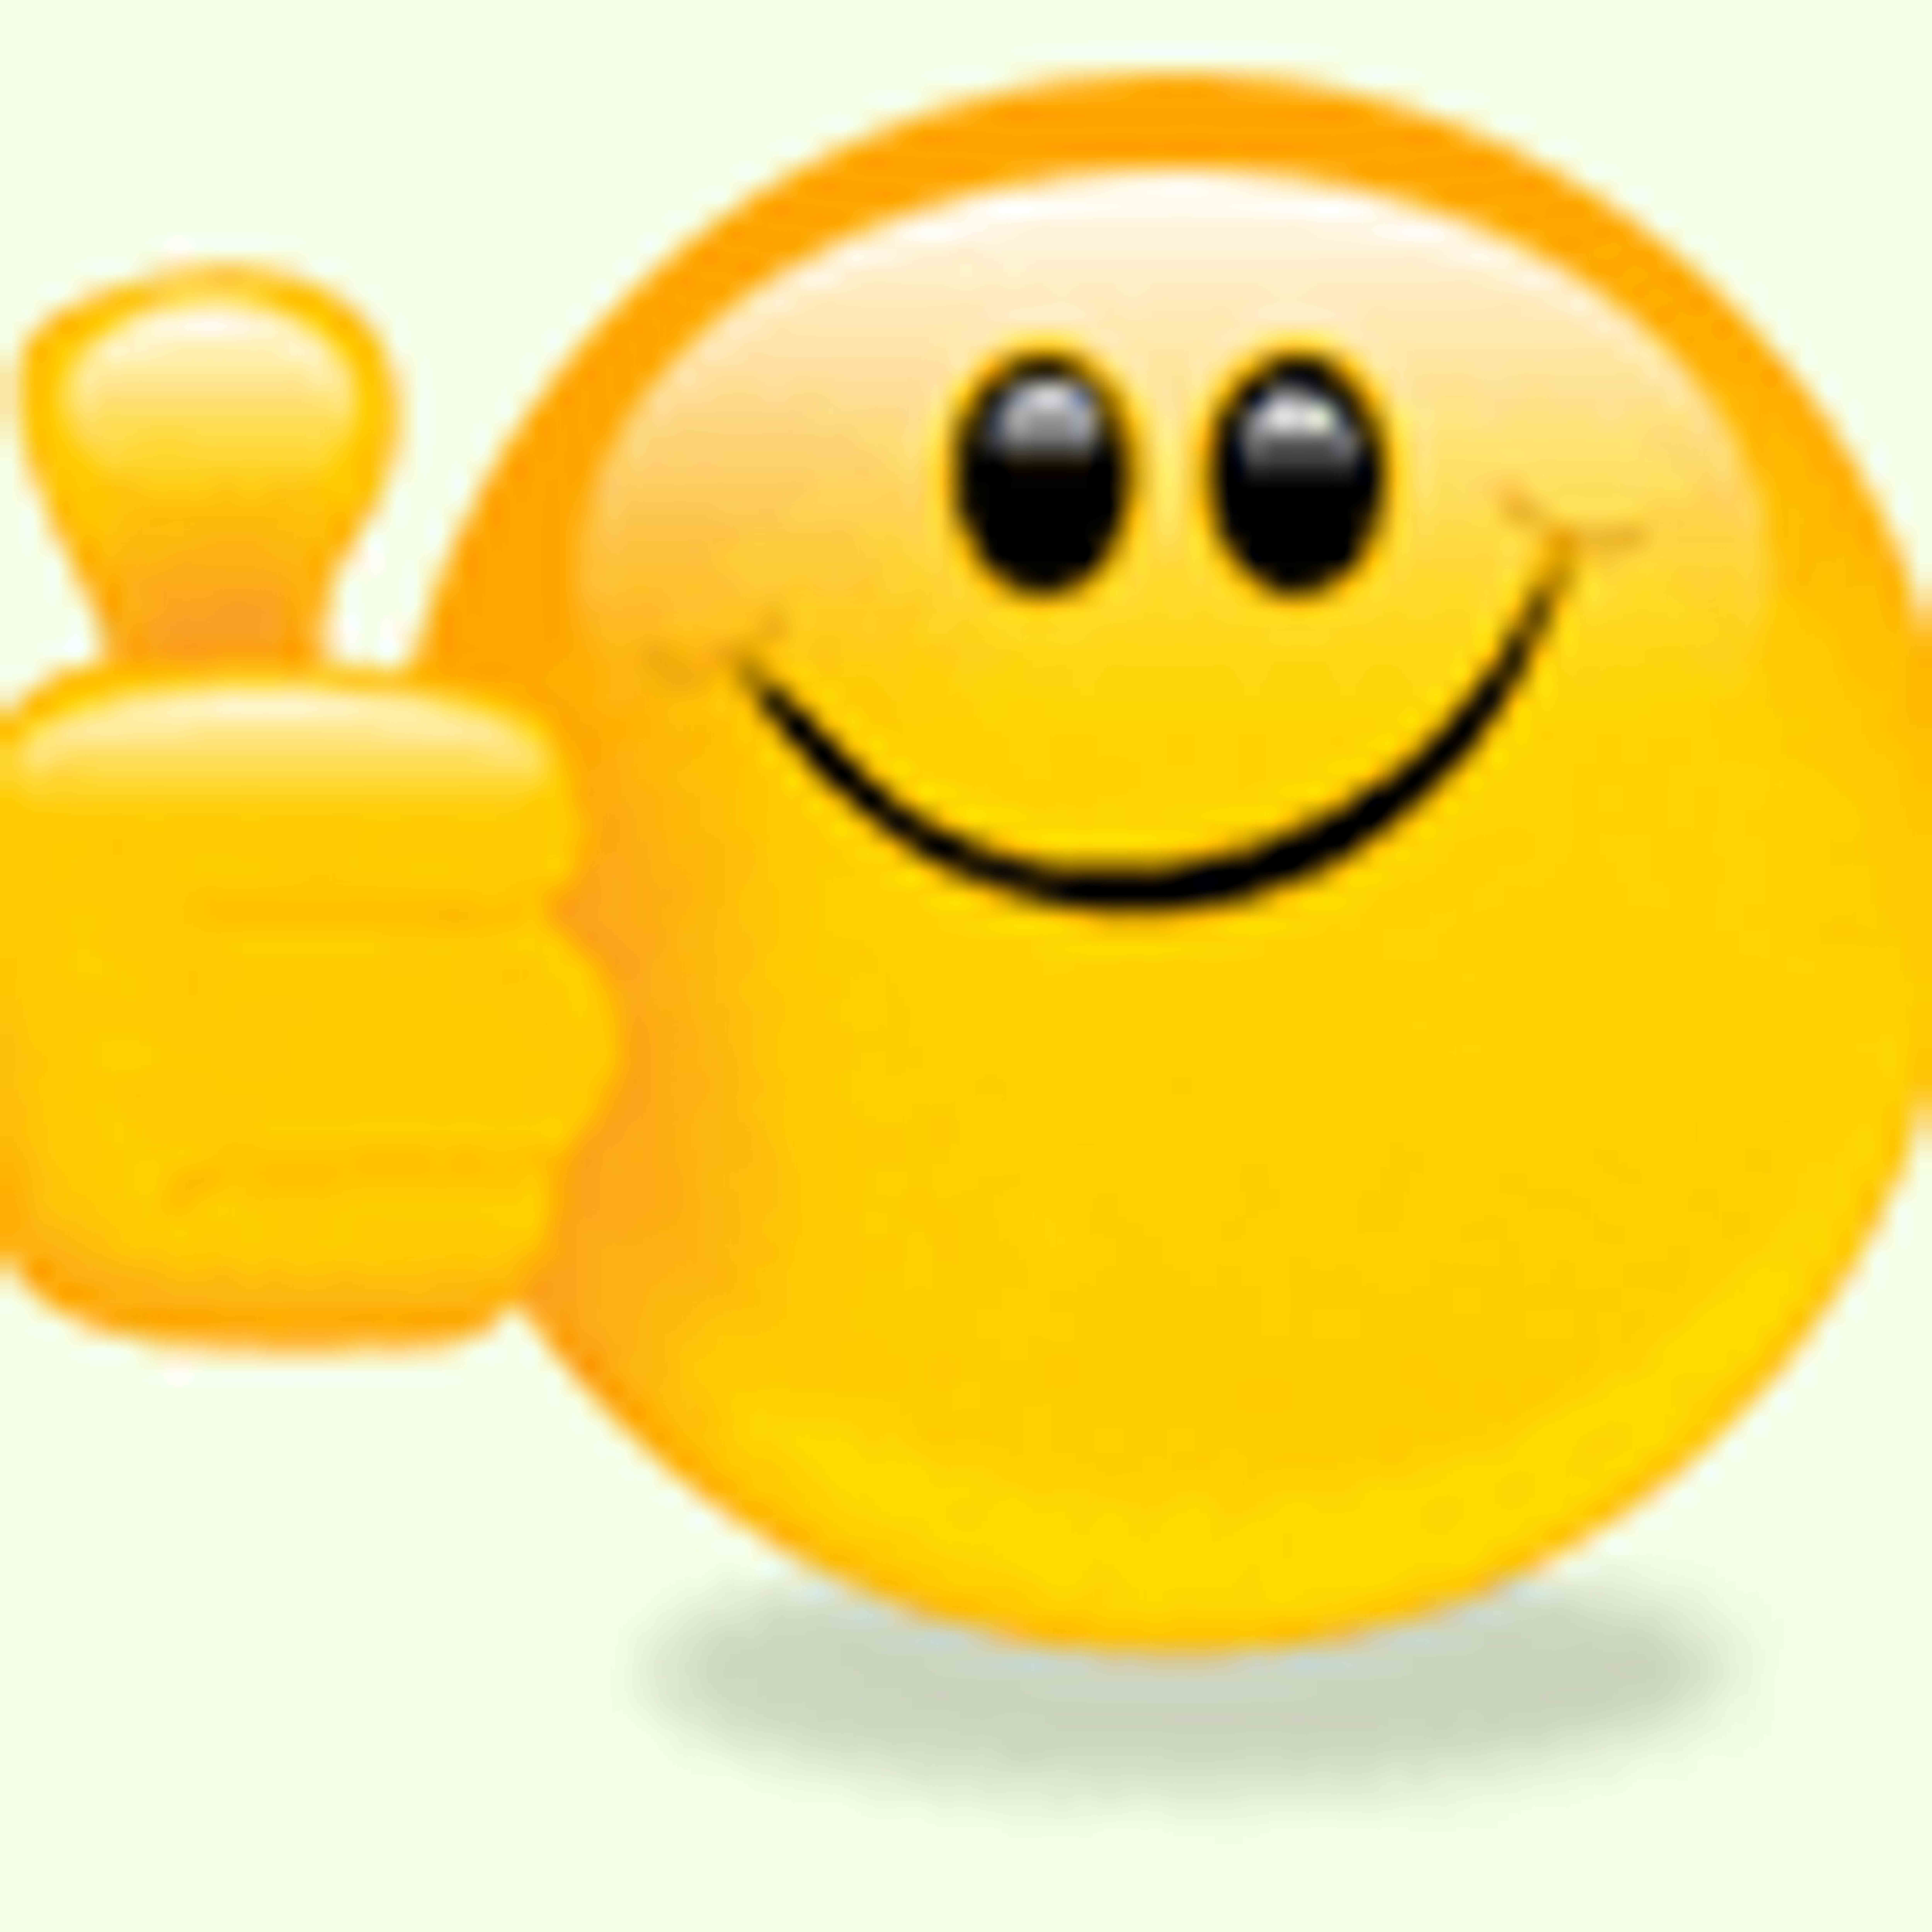 Smiley Thumbs Up | Free Download Clip Art | Free Clip Art | on ...